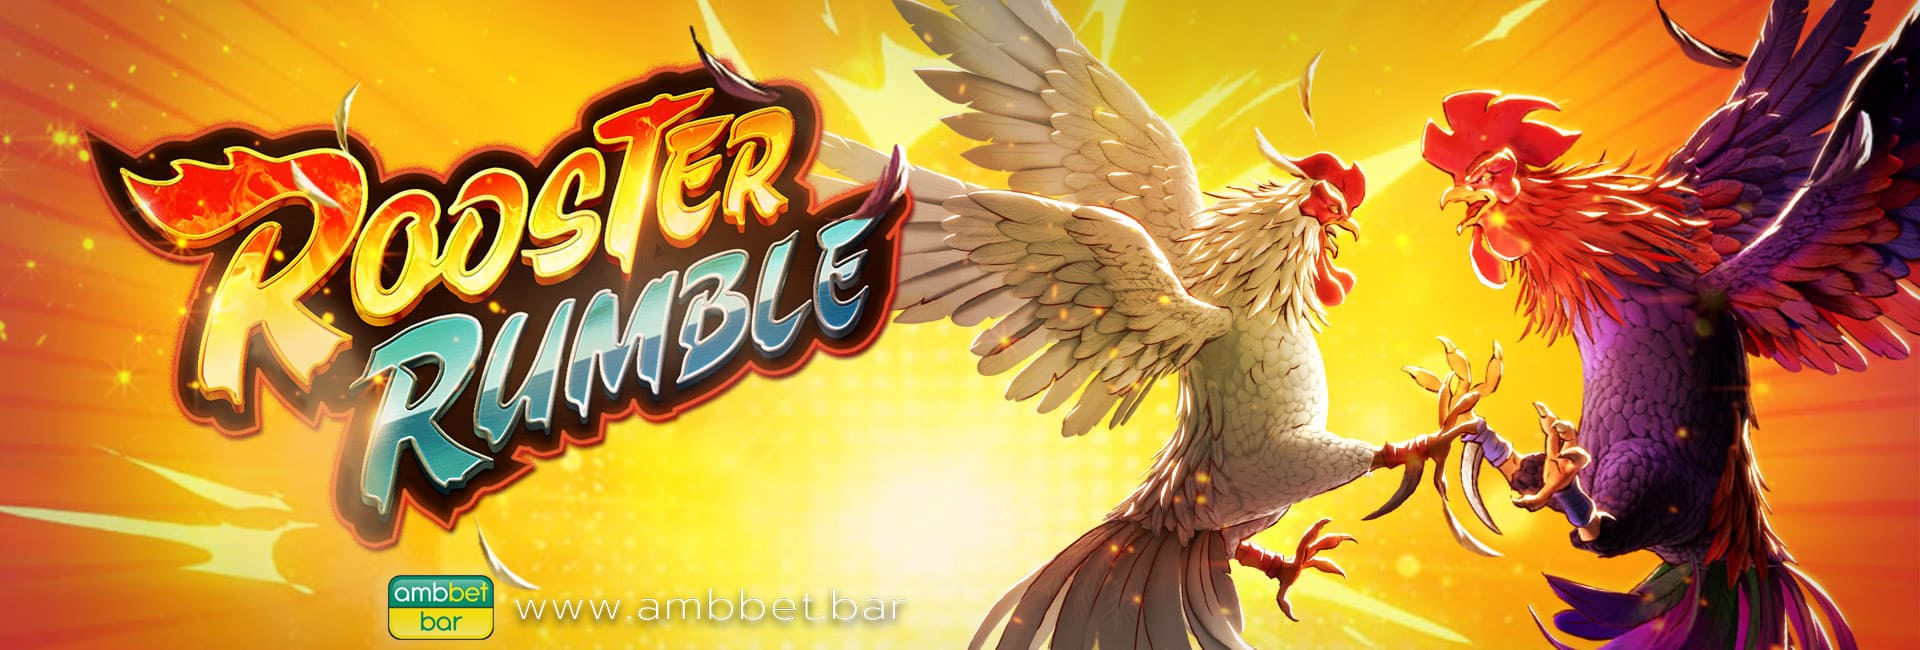 Rooster Rumble banner